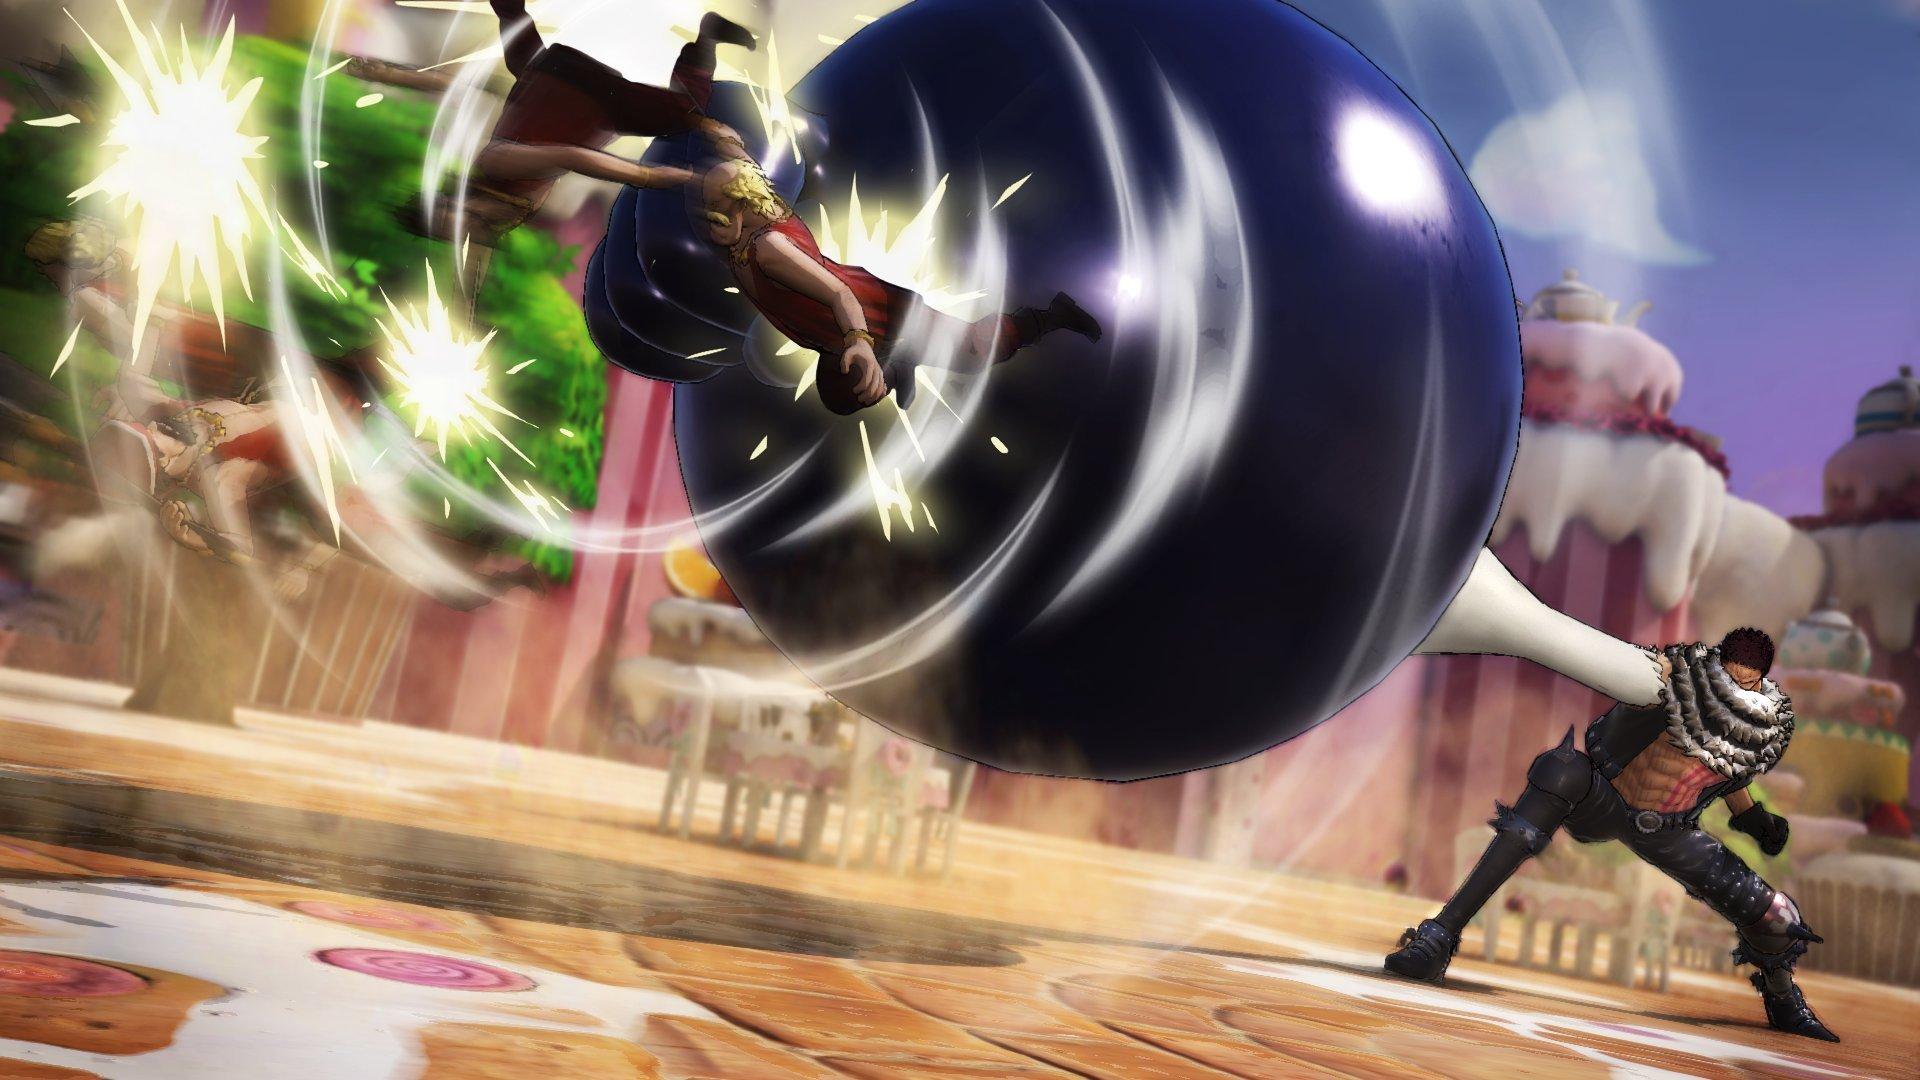 ONE PIECE: PIRATE WARRIORS 4 Additional Episodes Pack on Steam